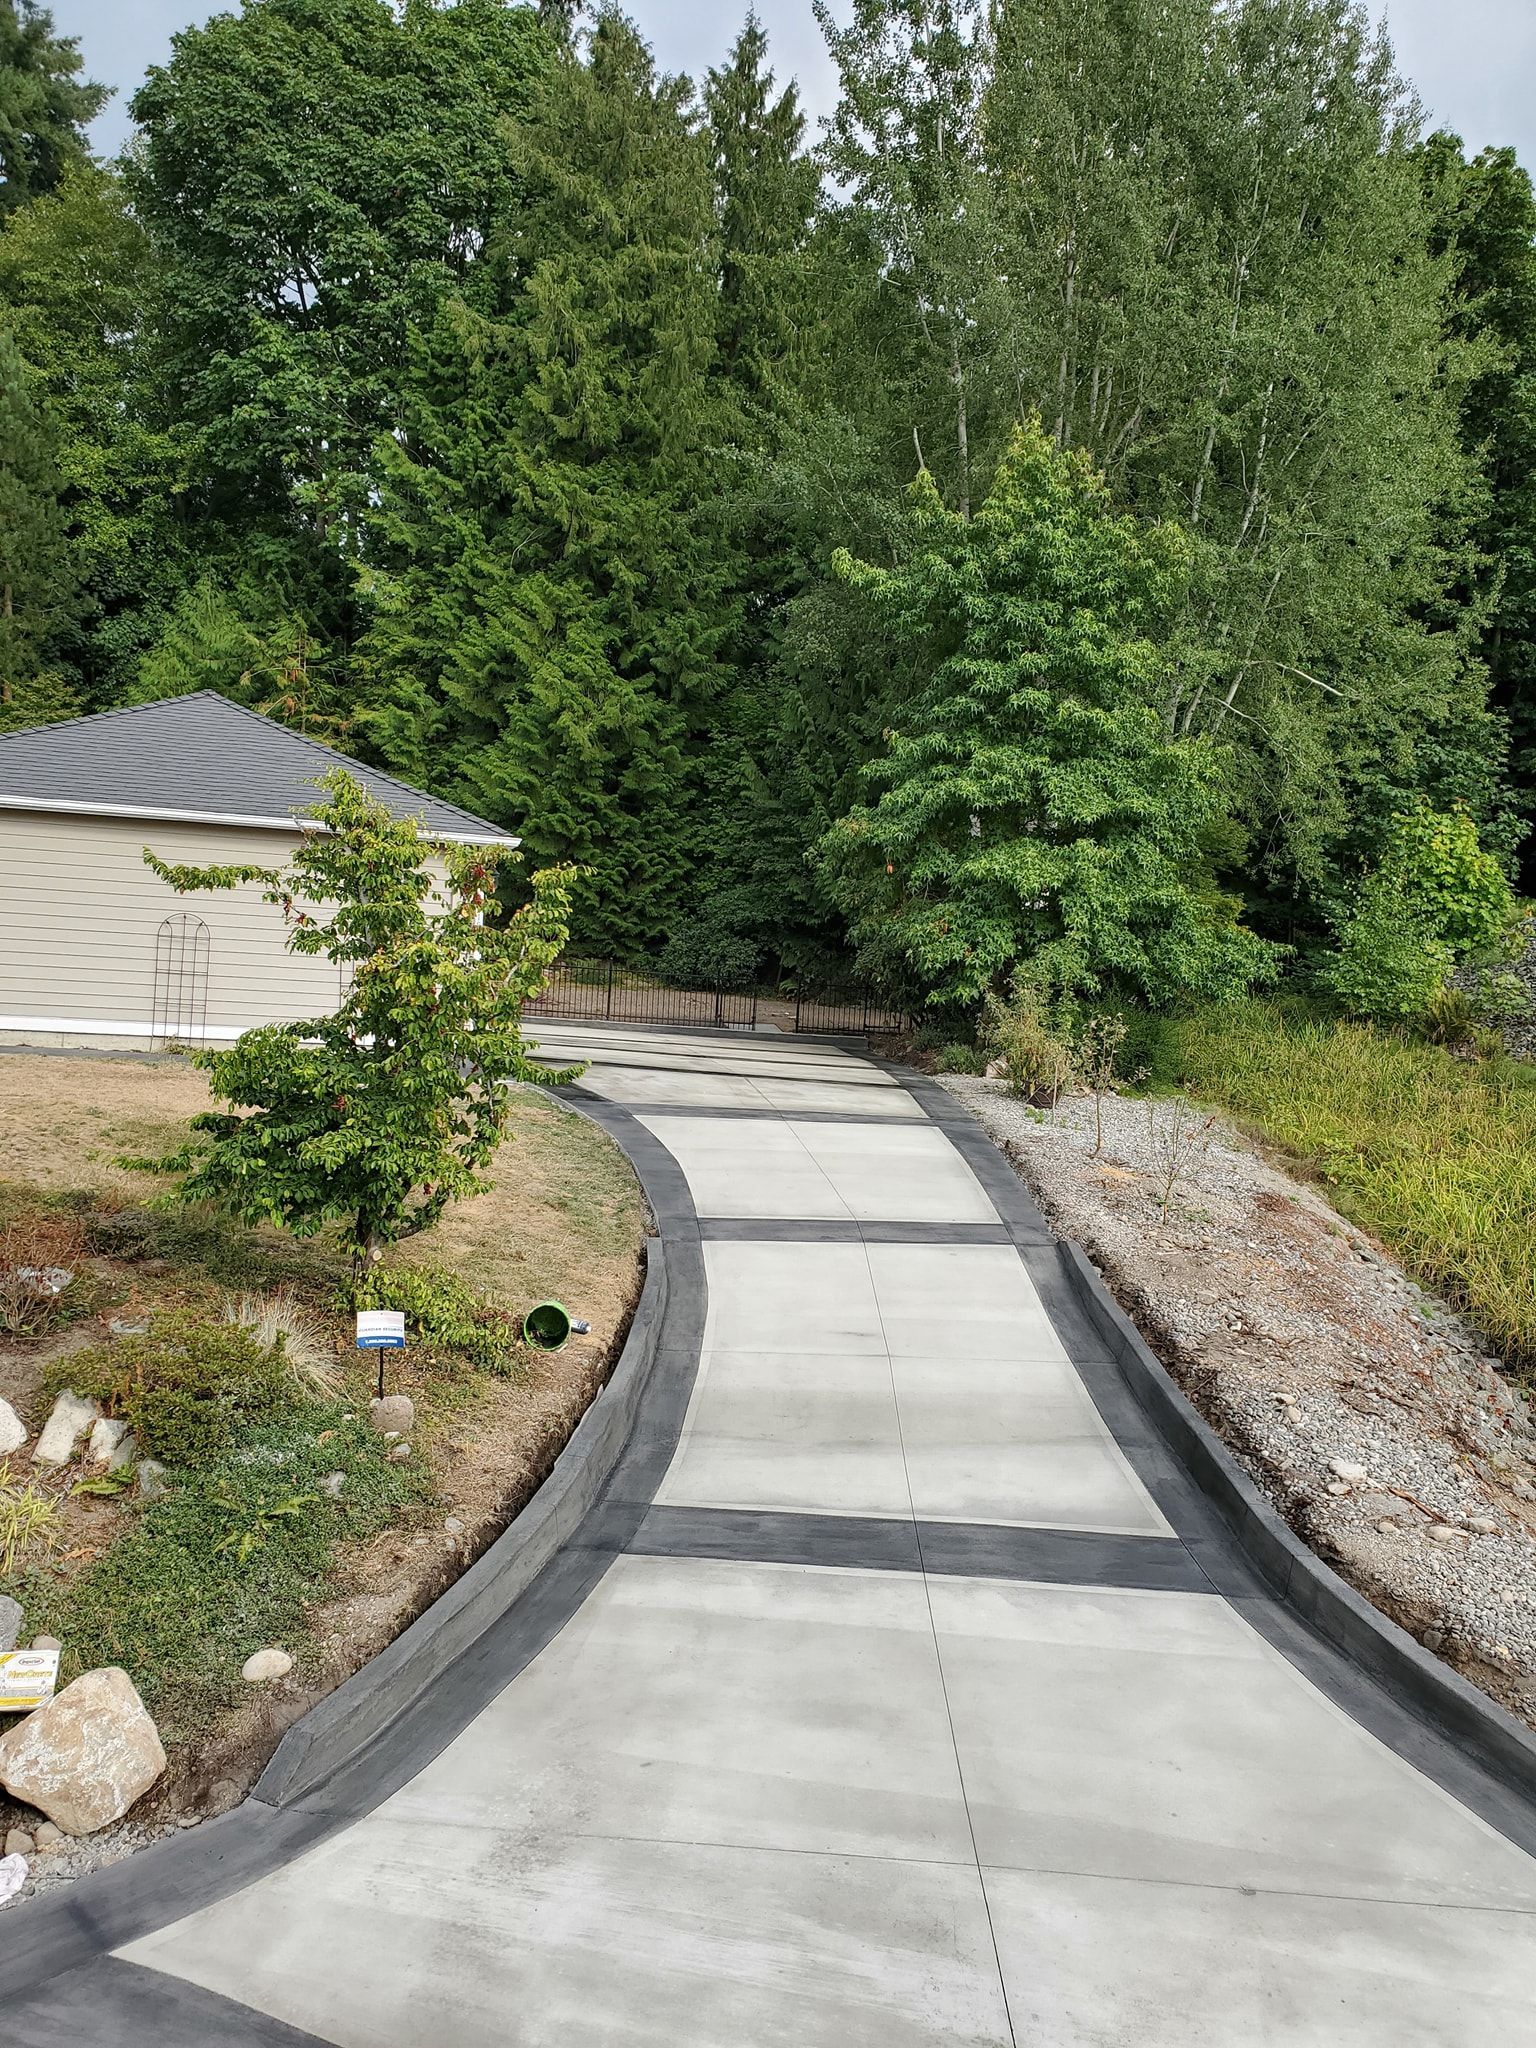 A concrete driveway leading to a house surrounded by trees.